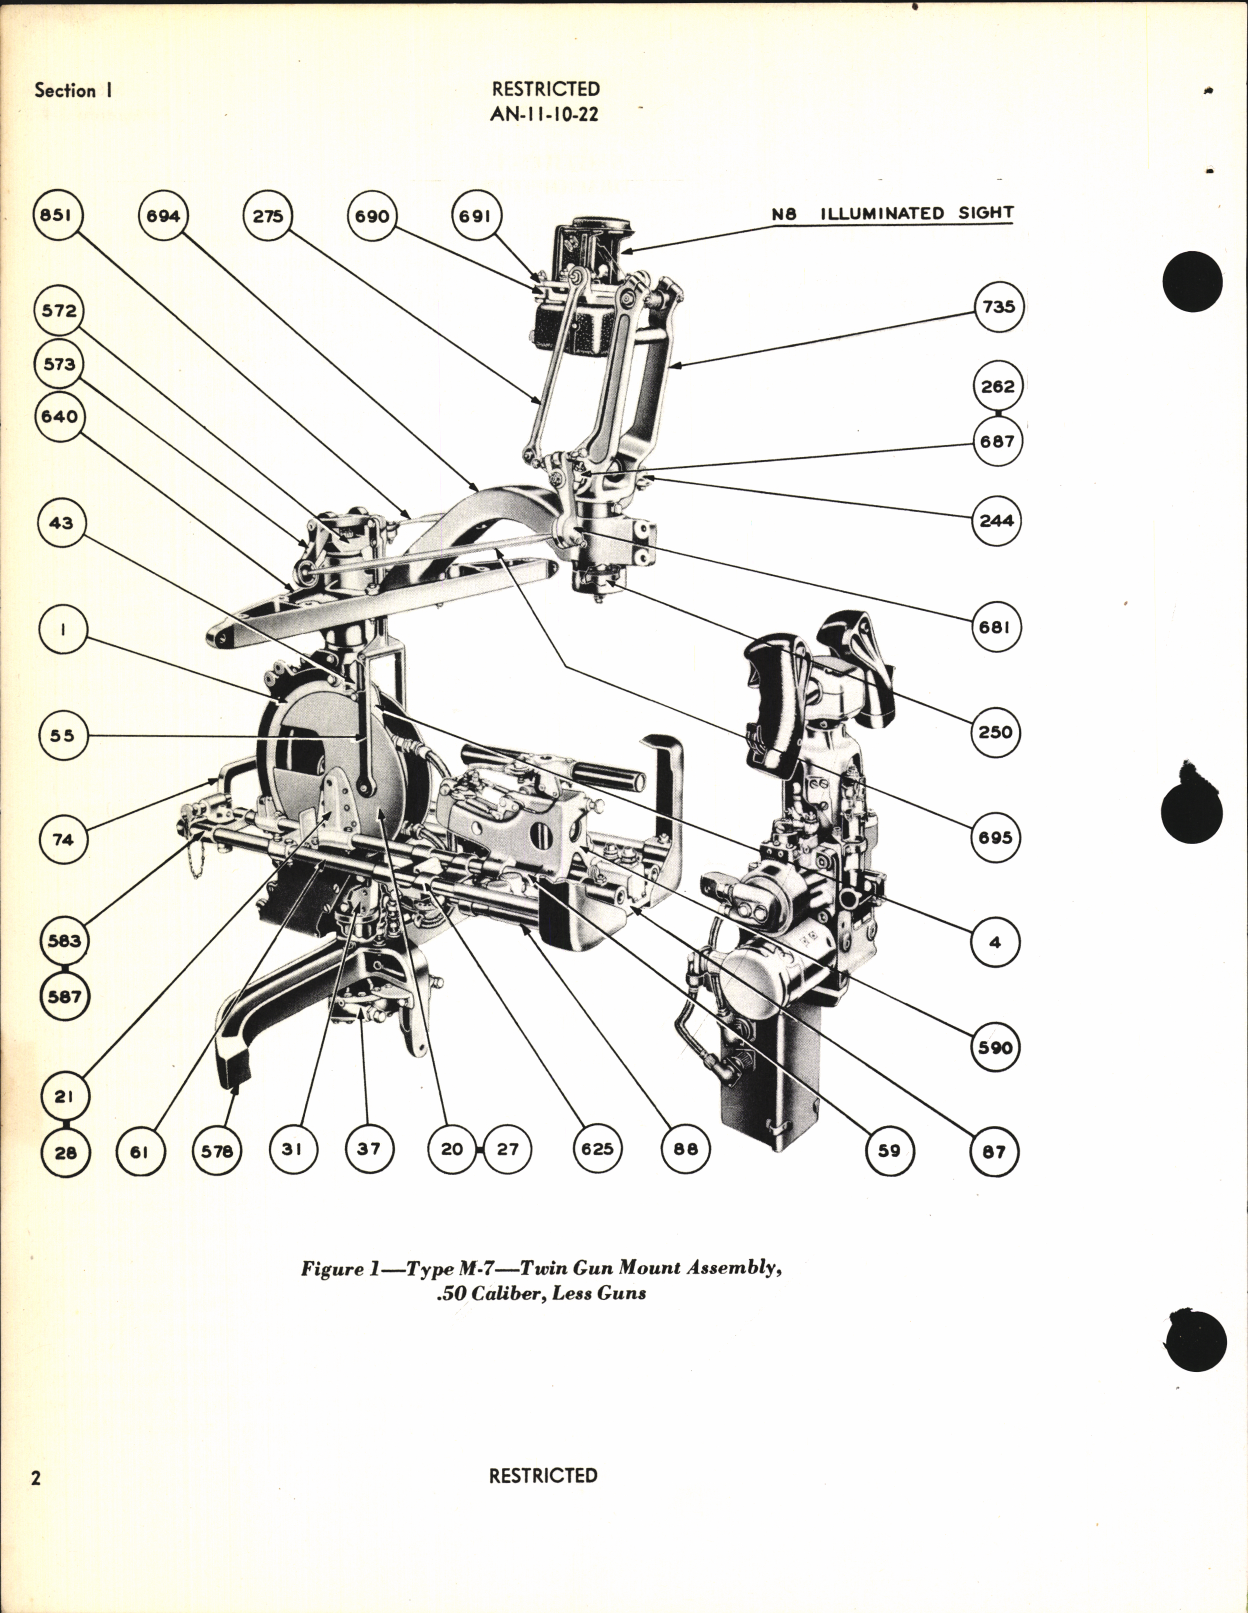 Sample page 6 from AirCorps Library document: Handbook of Instructions with Parts Catalog for Bell Twin Gun Mount Assembly Type M-7